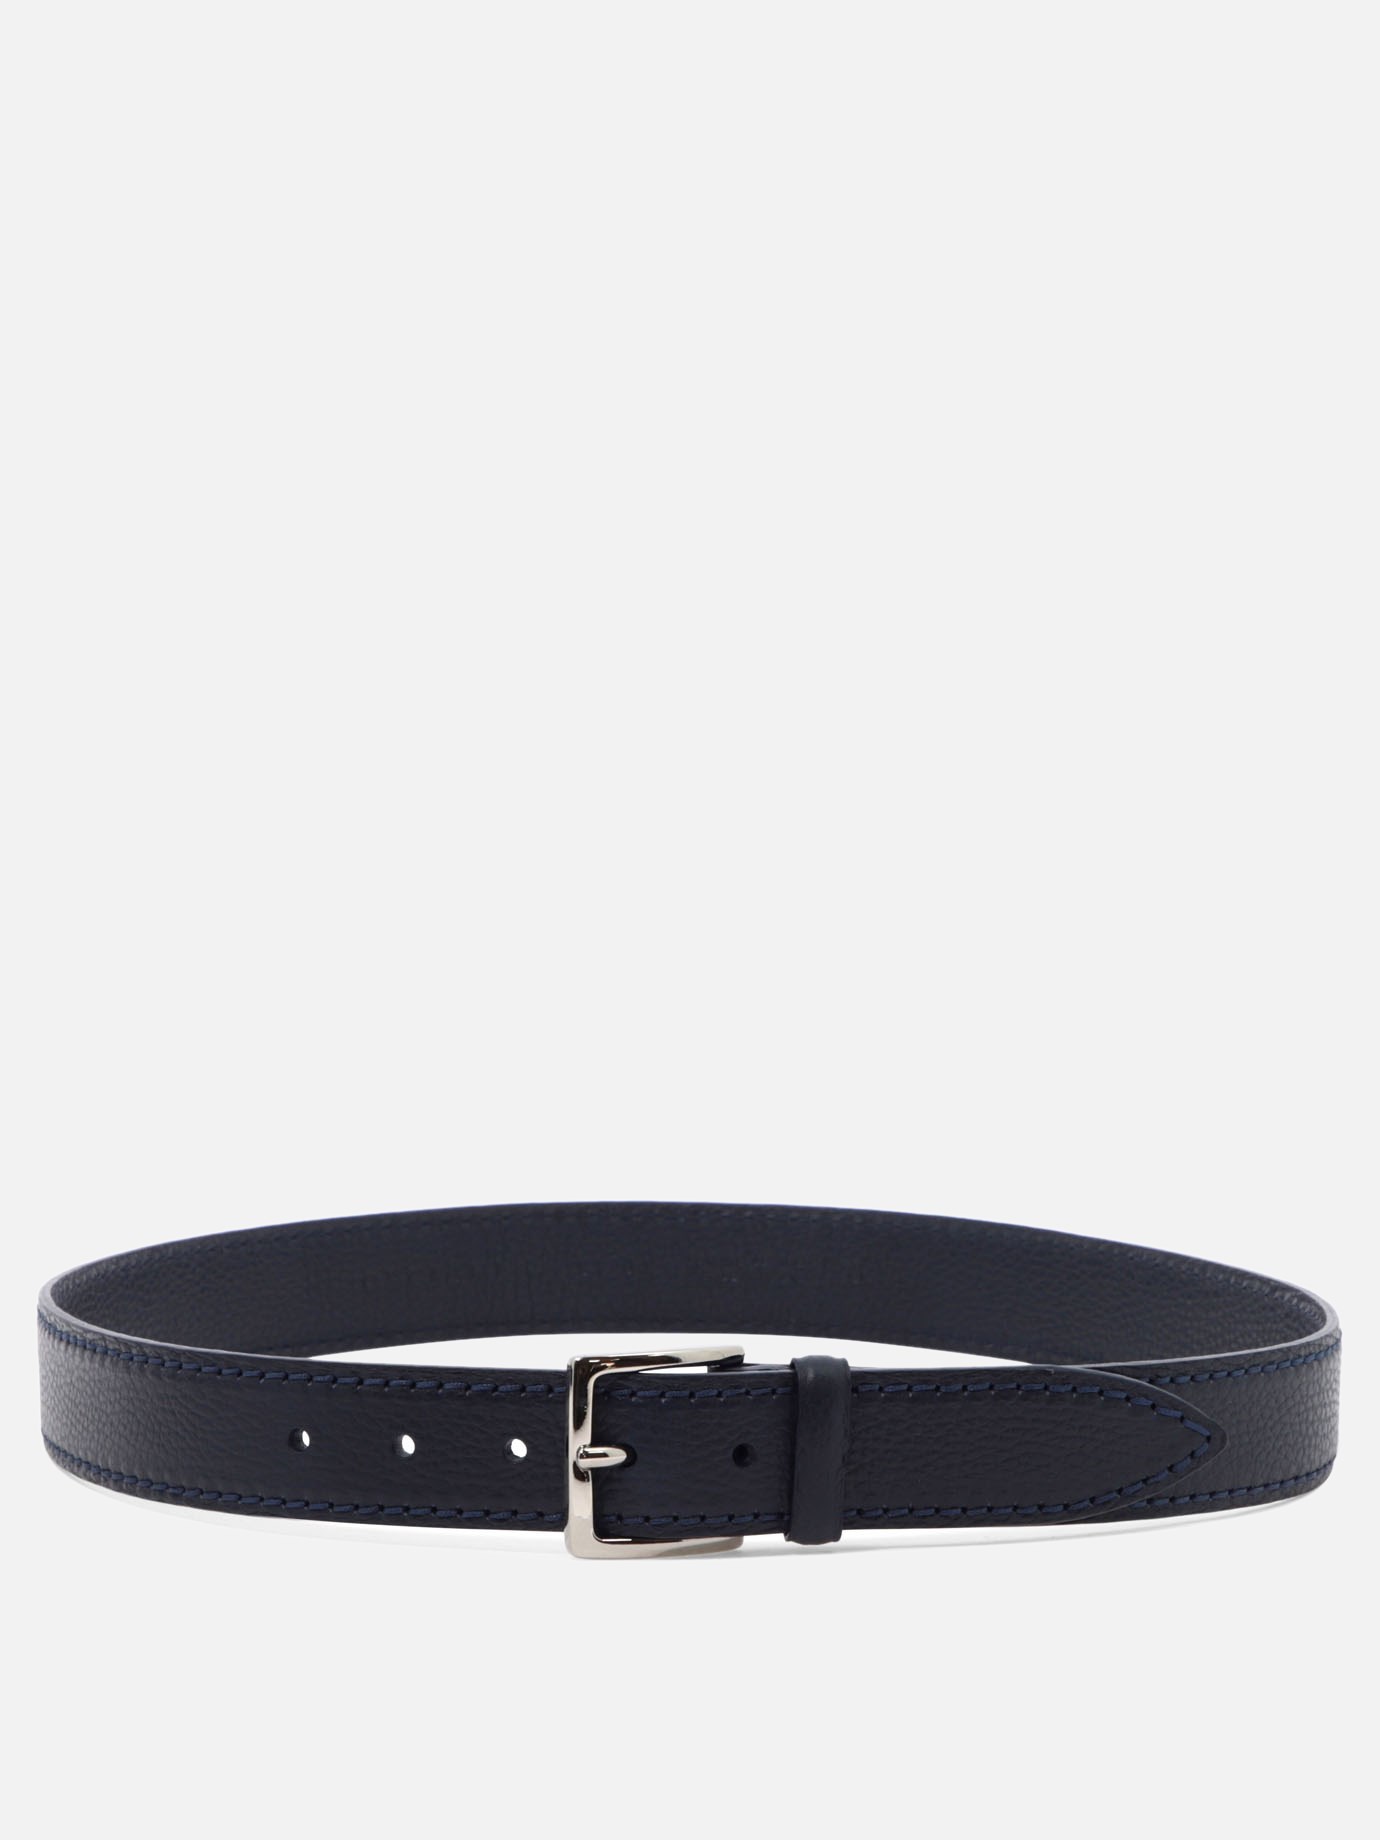 Dollar leather beltby Orciani - 0